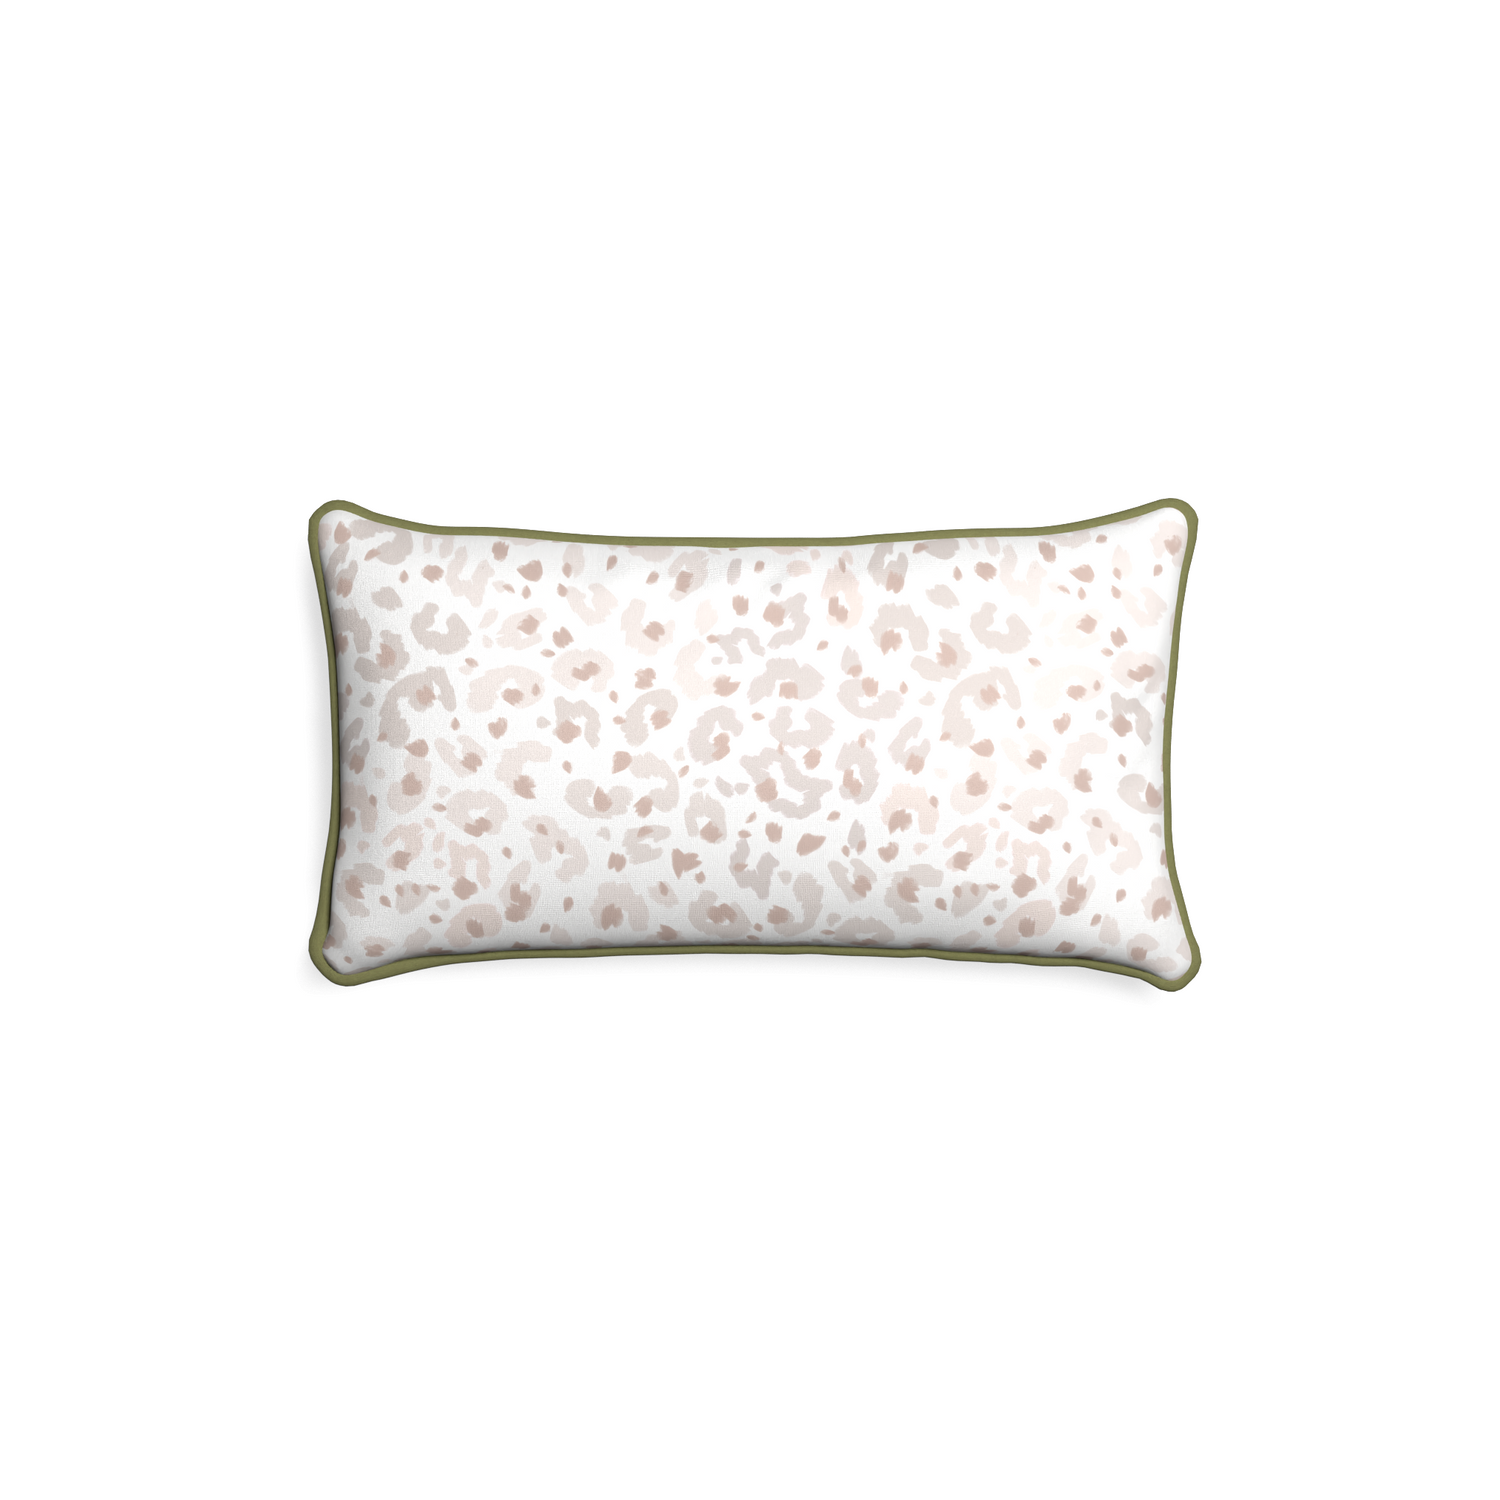 rectangle beige animal print pillow with moss green piping